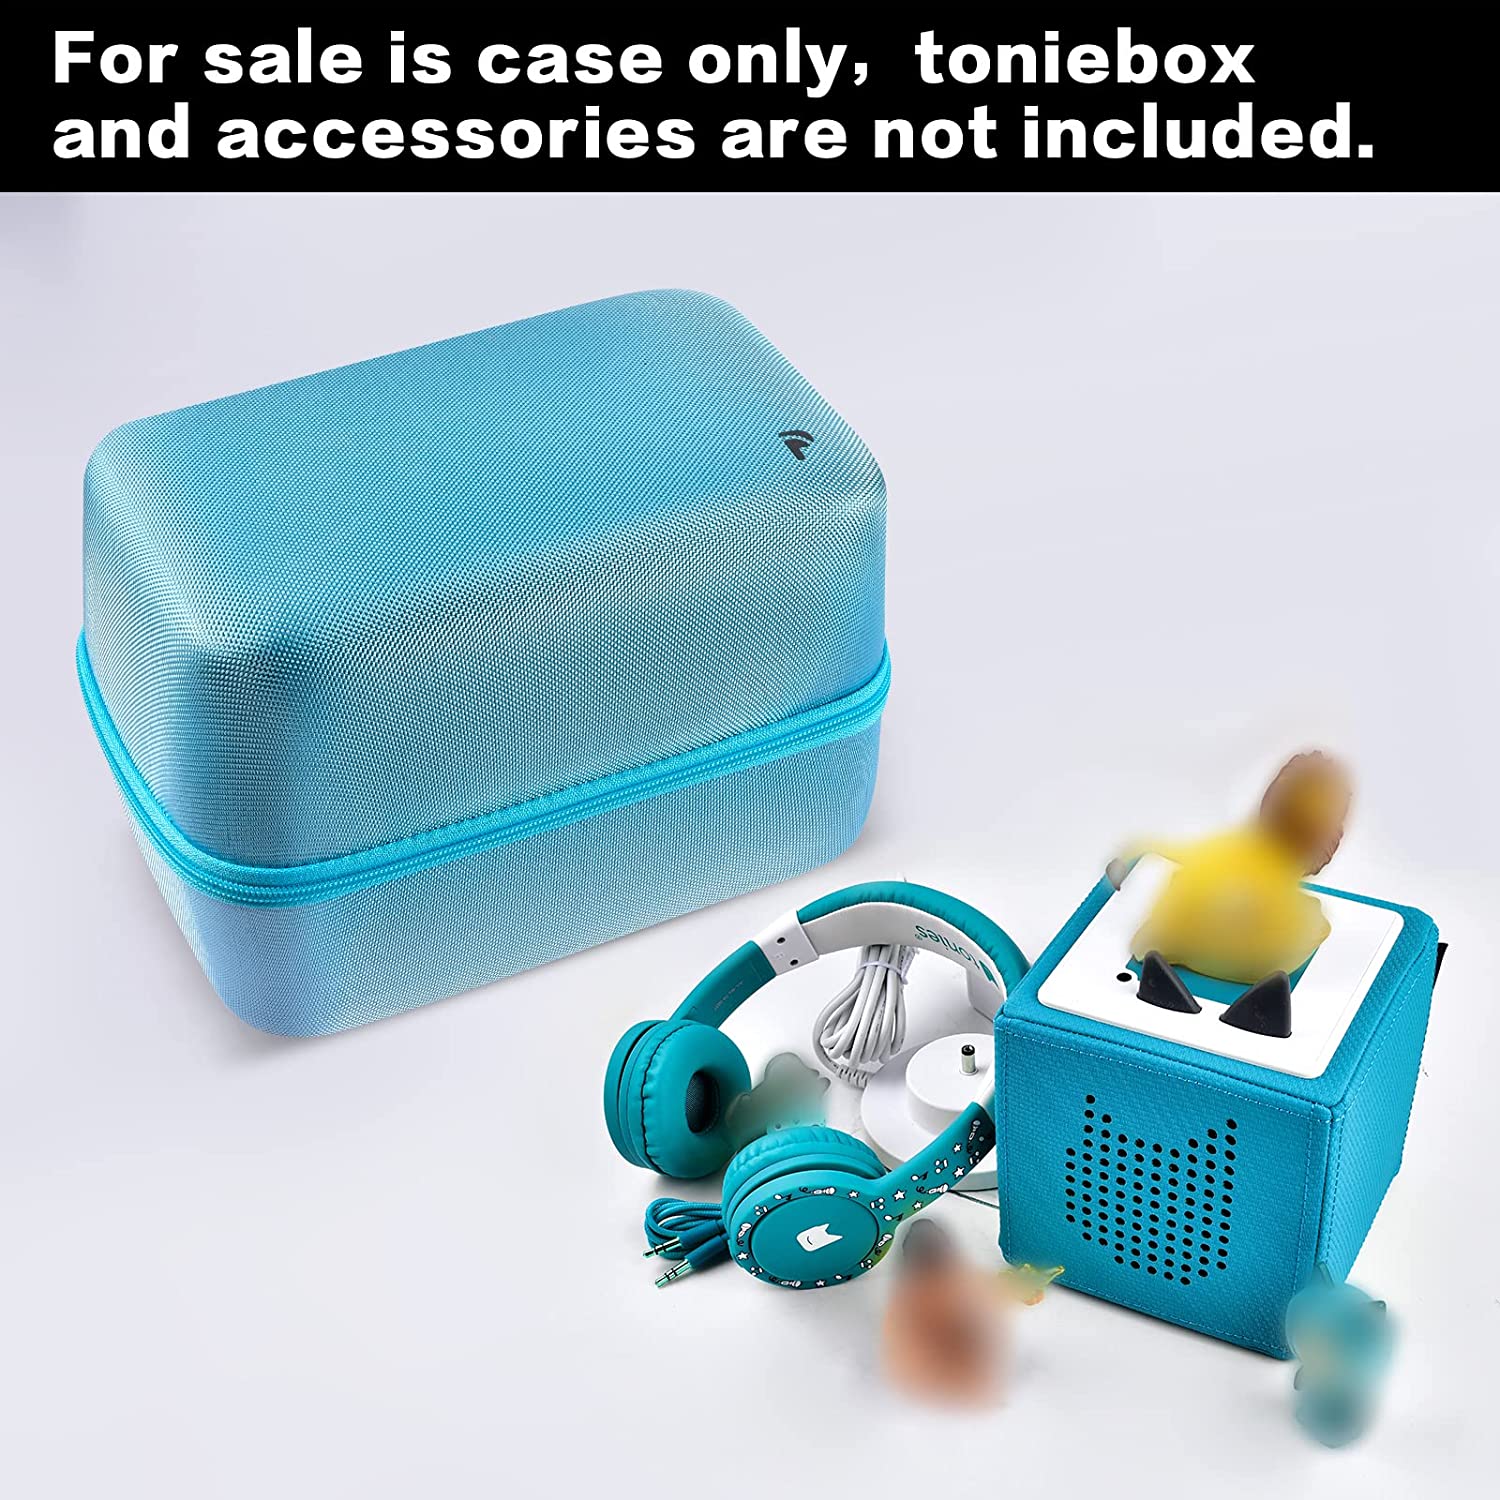 PAIYULE Case Compatible with Tonies Figures Audio Play Character, Figurine  Storage Holder for TonieBox Characters for Kids, Toy Organizer Box(Bag